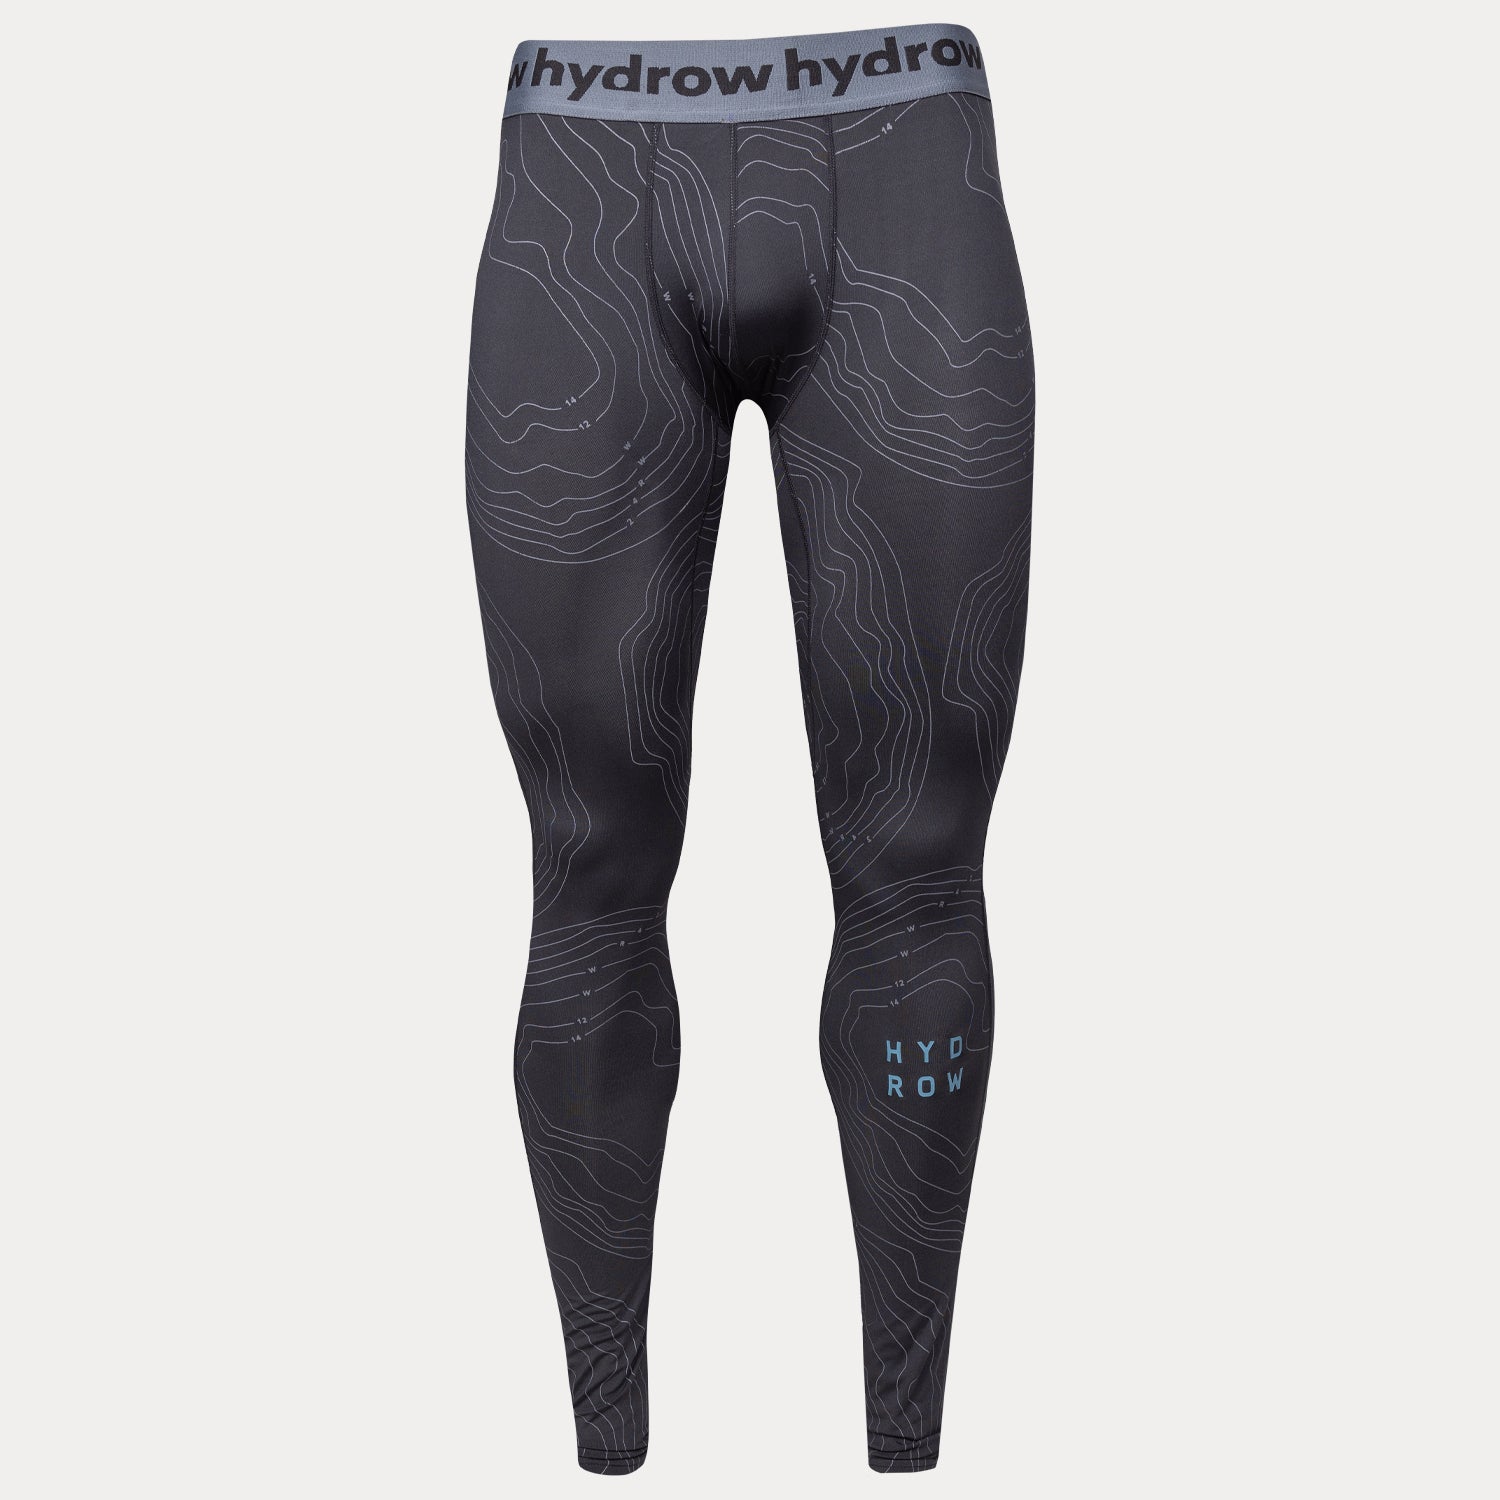 black active compression tights with hydrow logo on waistband and "HYDROW" test on left shin with bathymetric lines pattern